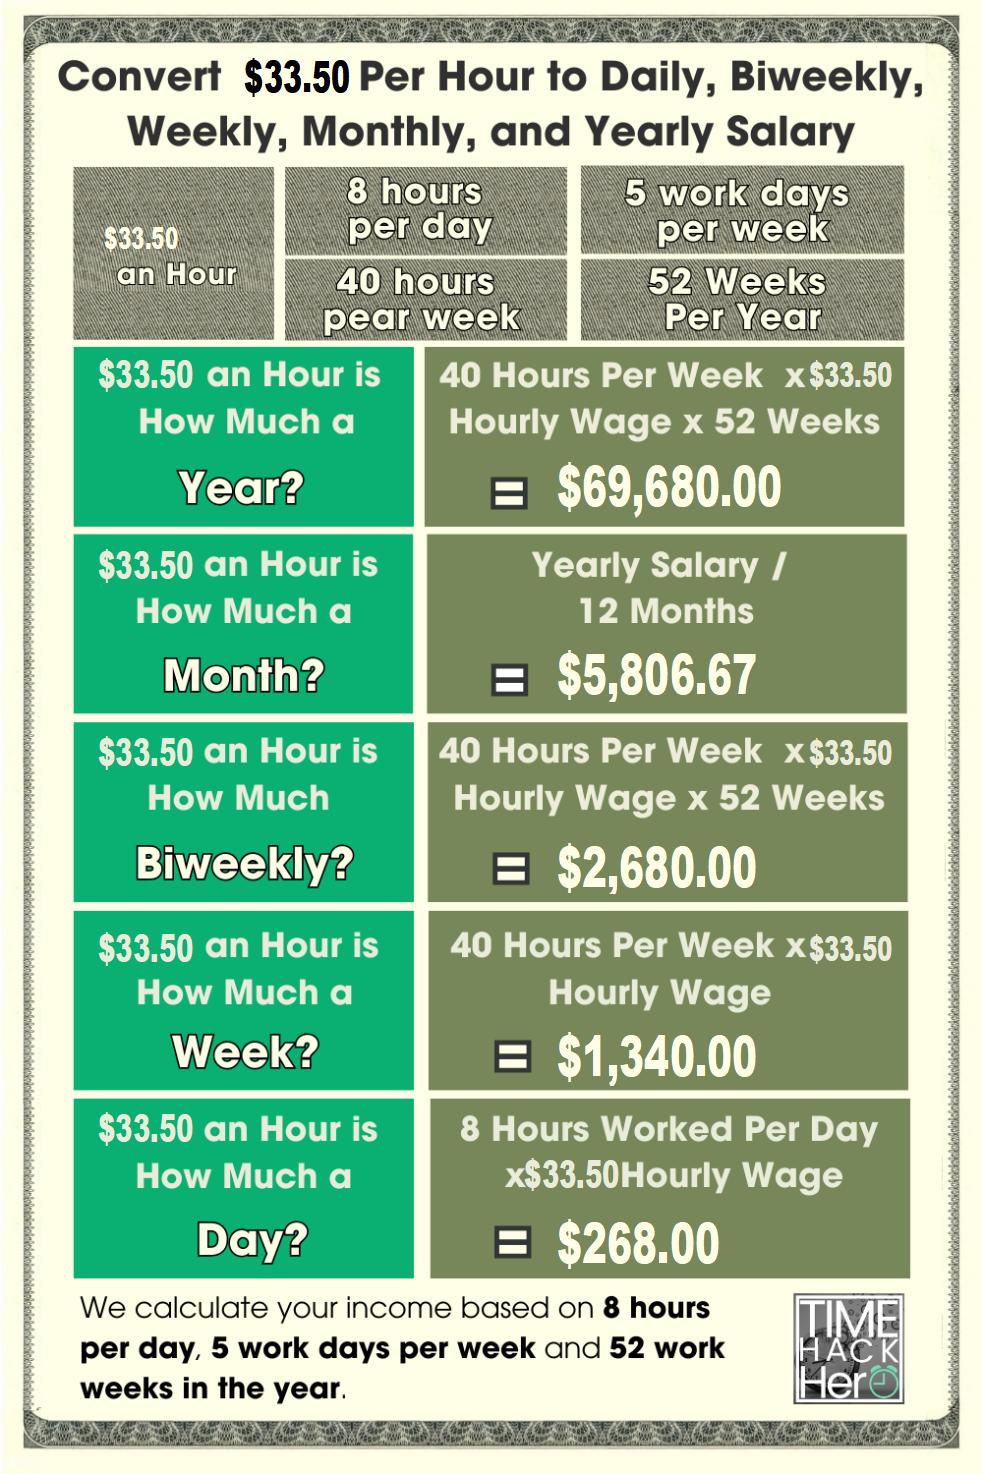 Convert $33.50 Per Hour to Weekly, Monthly, and Yearly Salary